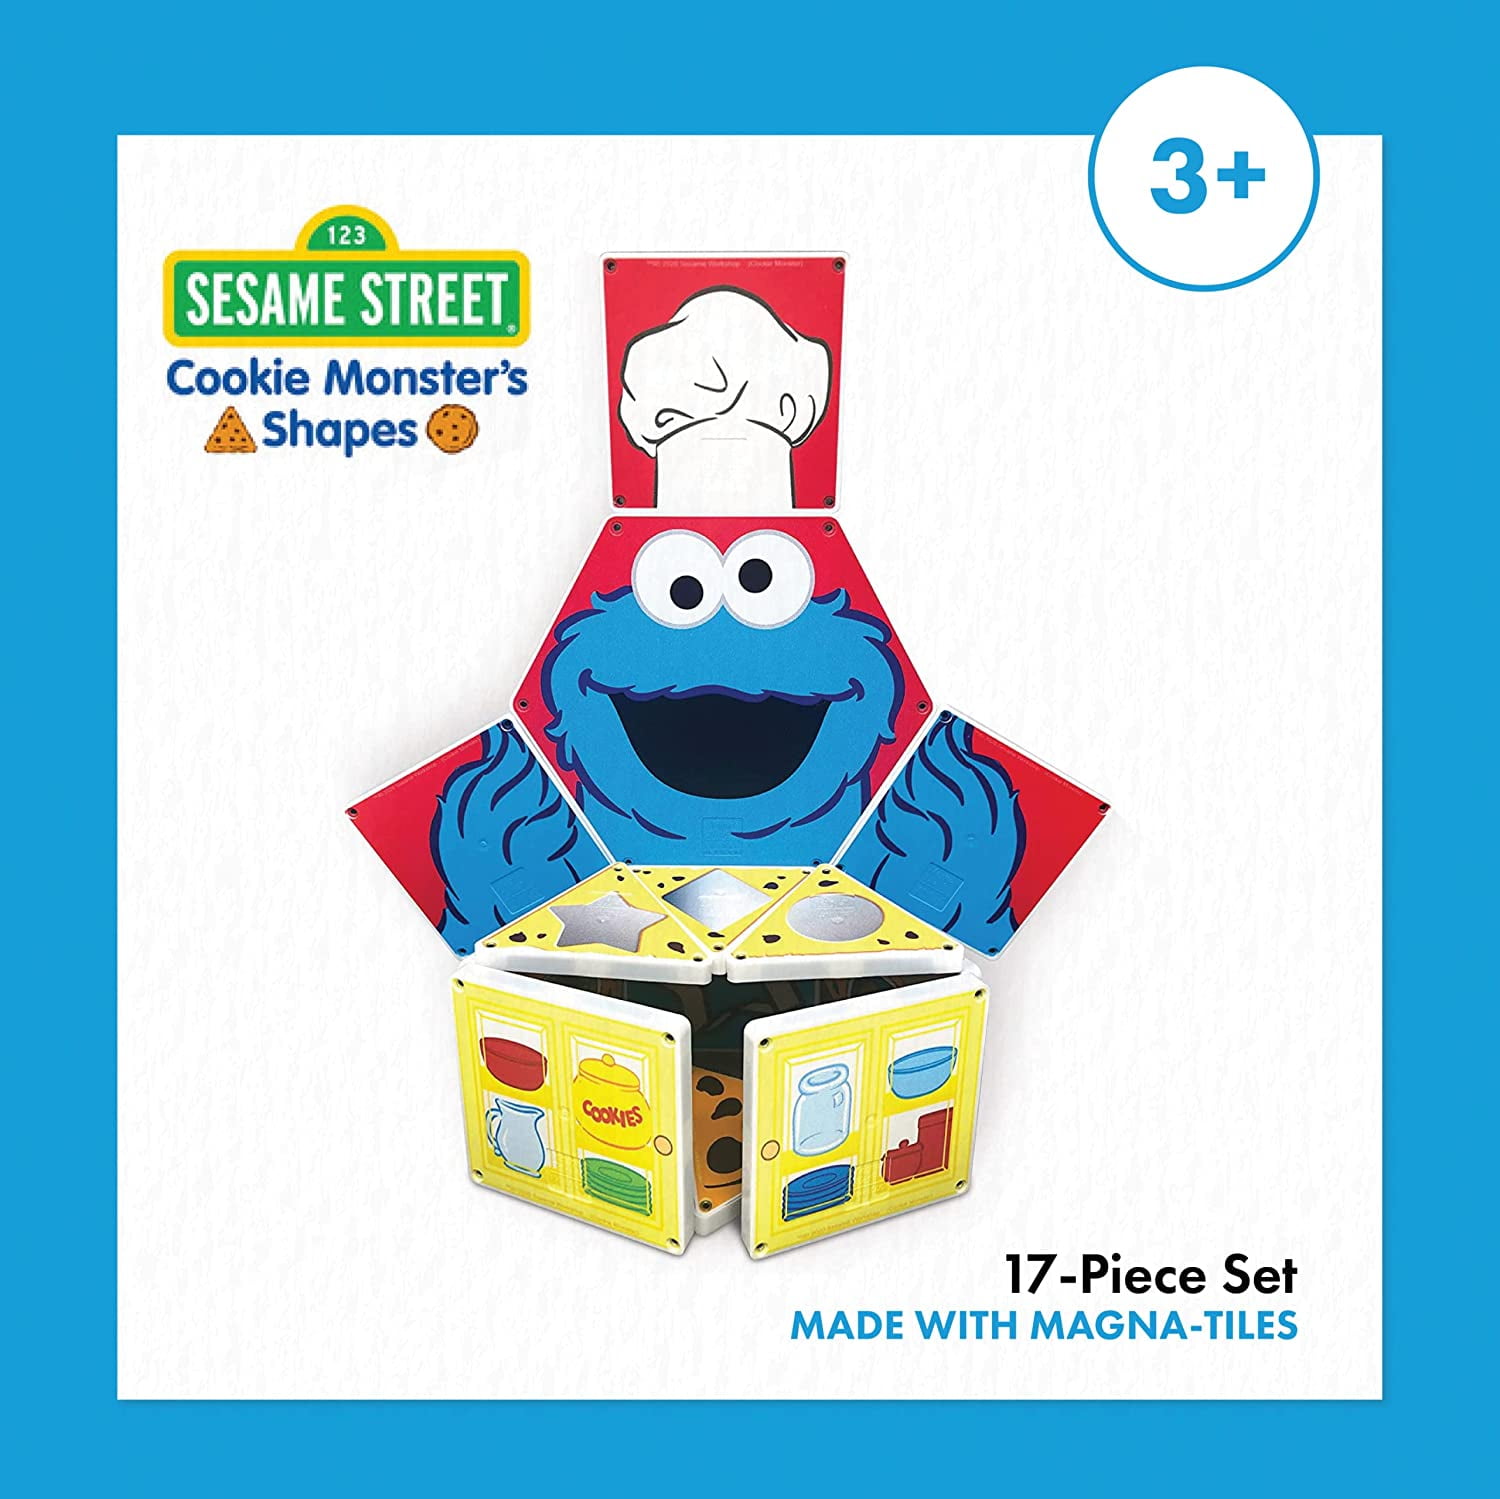 Magna-Tiles Sesame Street Cookie Monster Shapes Structure Set by